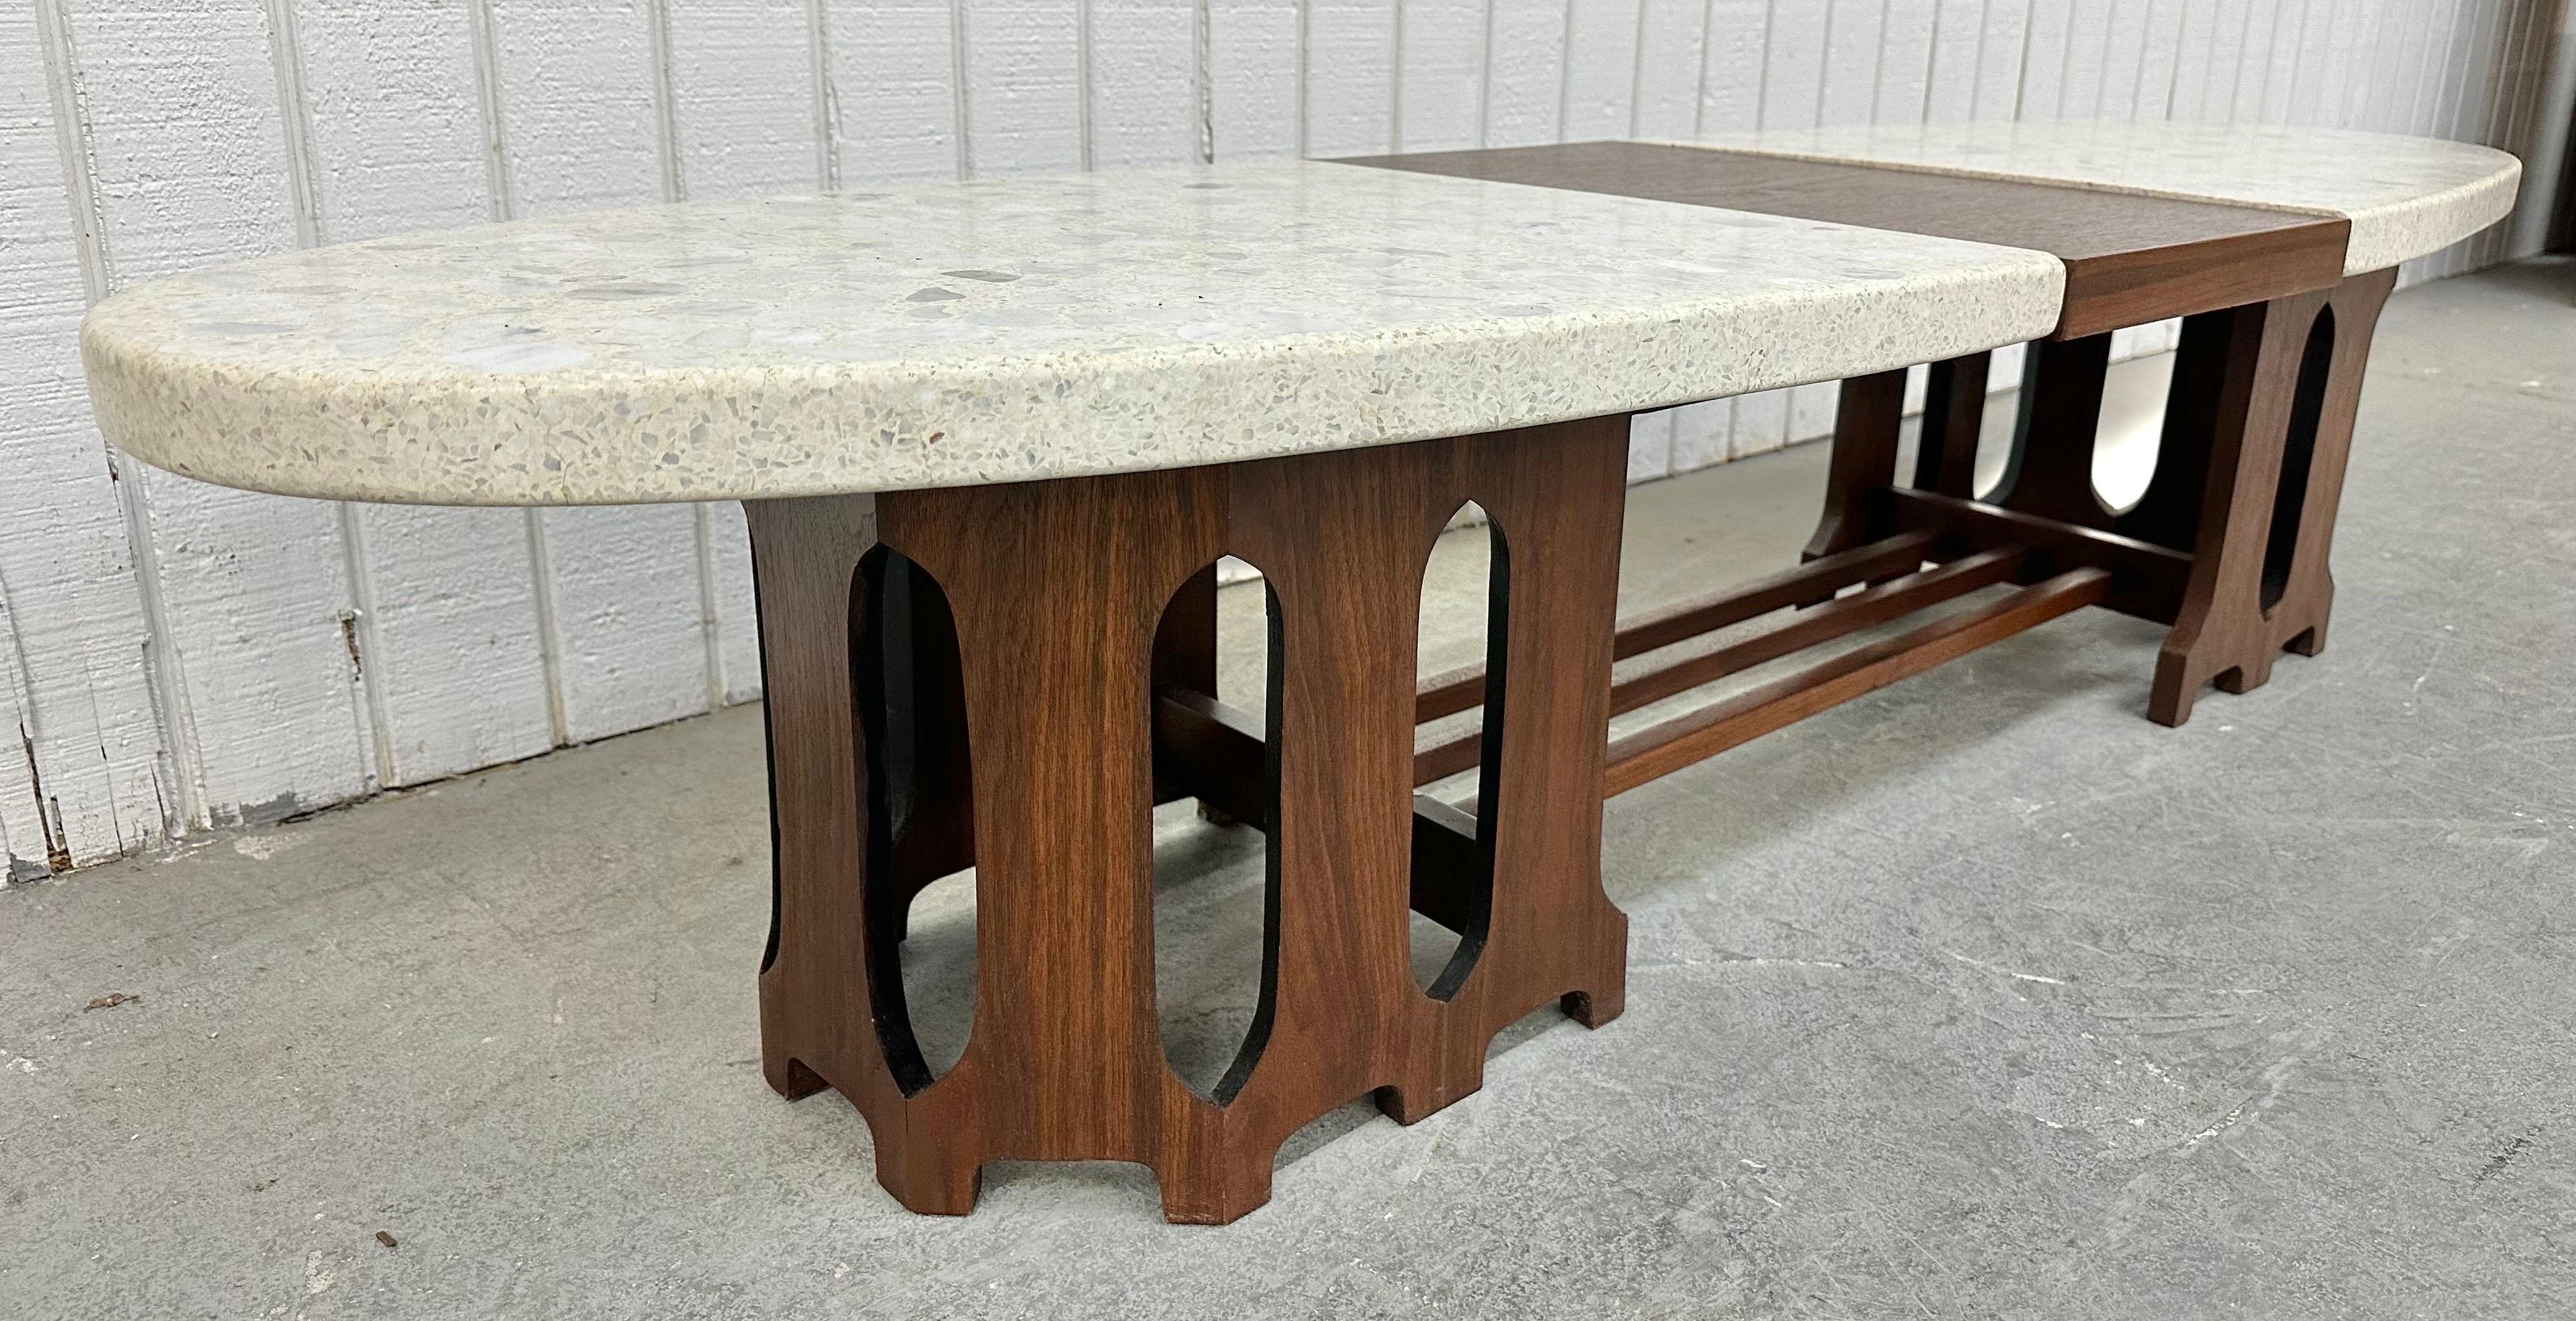 This listing is for a Mid-Century Modern Harvey Probber Terrazzo & Walnut Coffee Table. Featuring an oval design , removable white terrazzo stone on each side, the center is walnut connected to the wooden base, and a beautiful walnut finish. This is